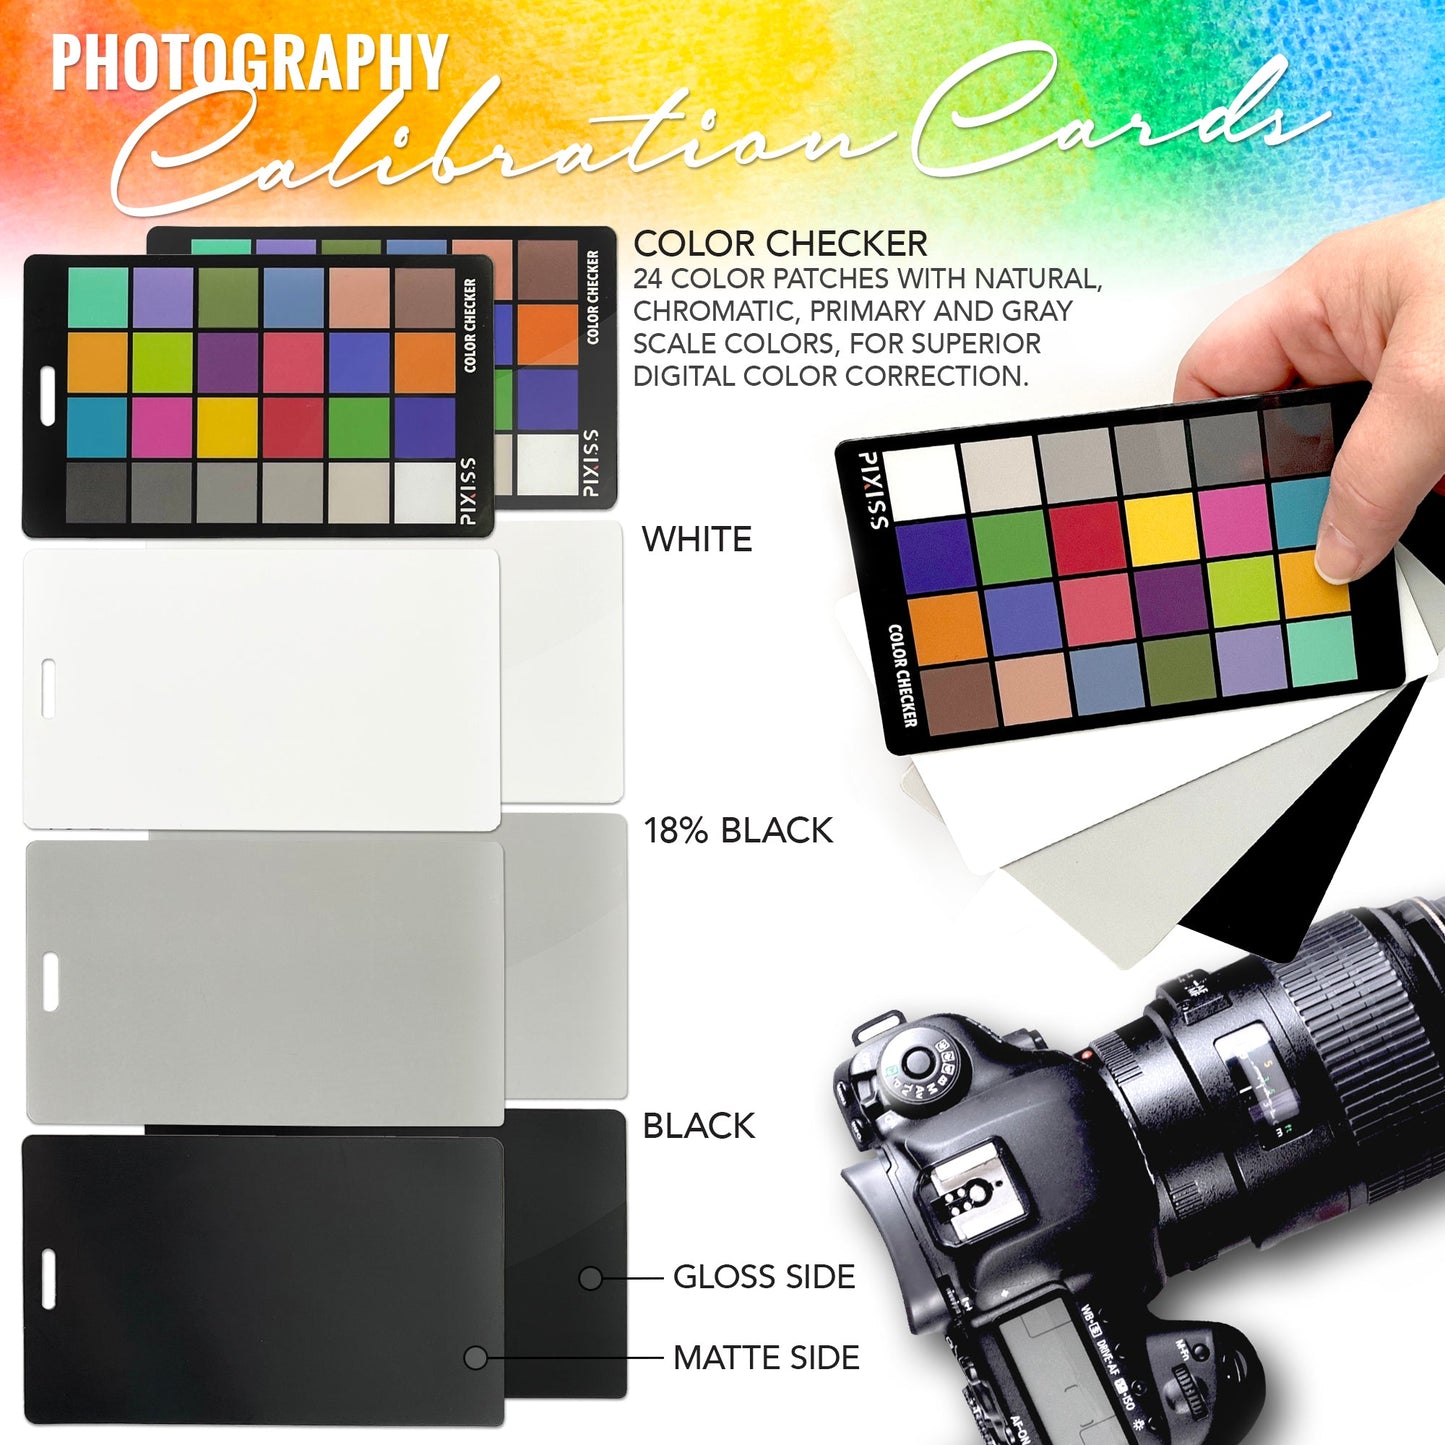 PIXISS Photography Calibration Cards with Lanyard and Lens Cloth by Pixiss